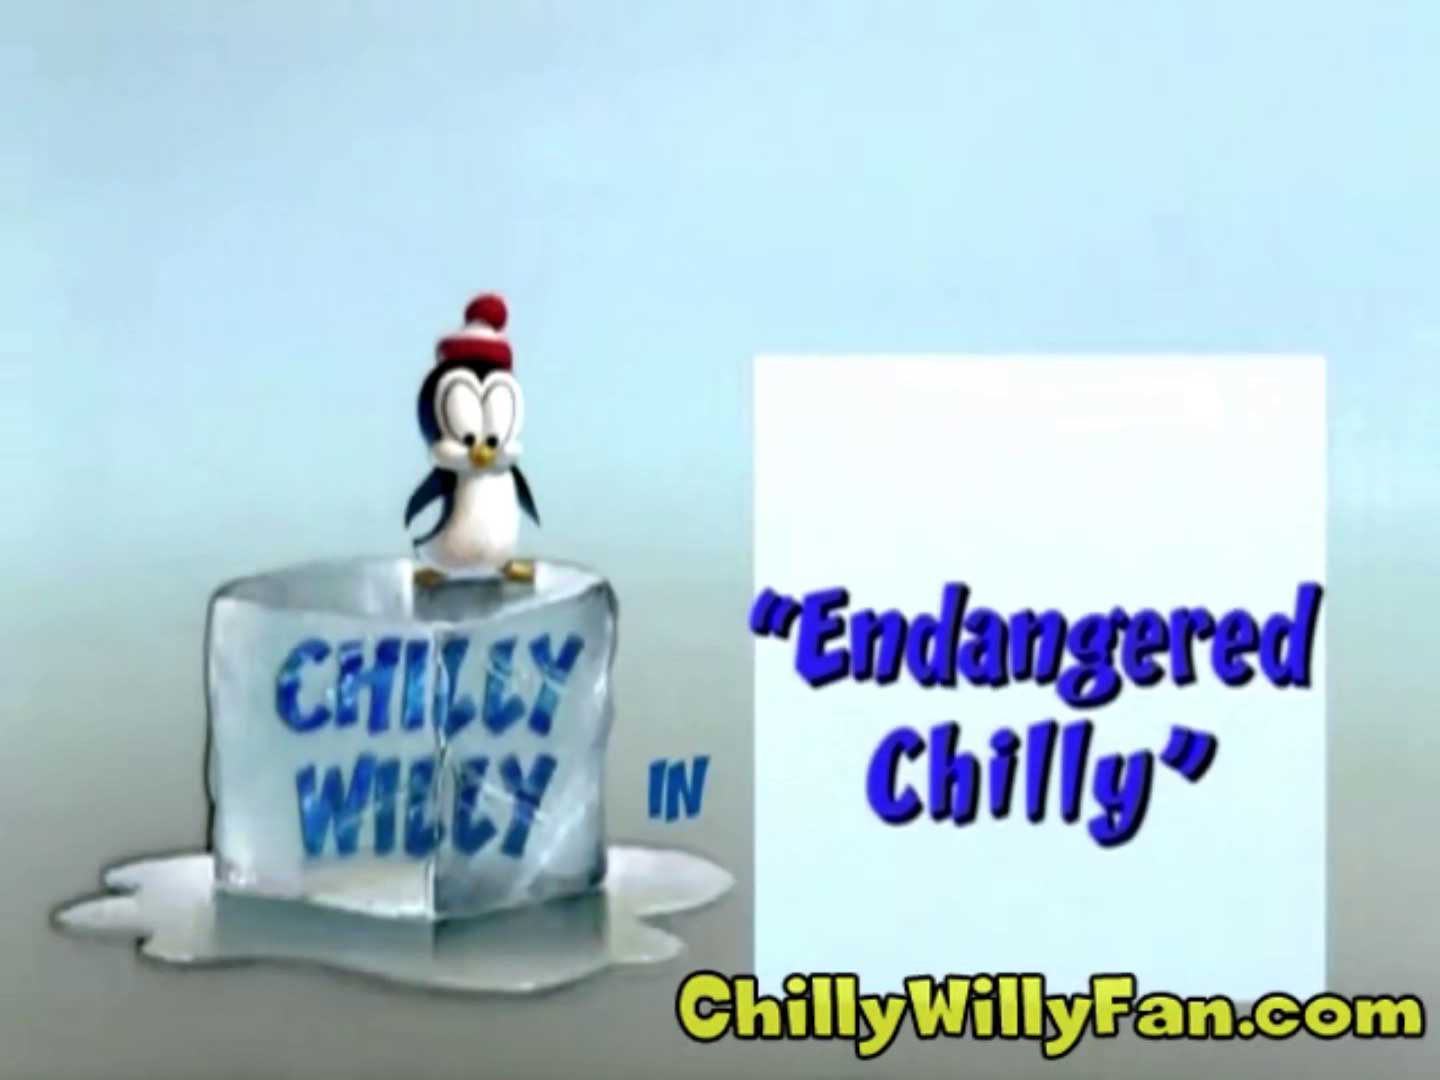 Chilly Willy - Endangered Chilly